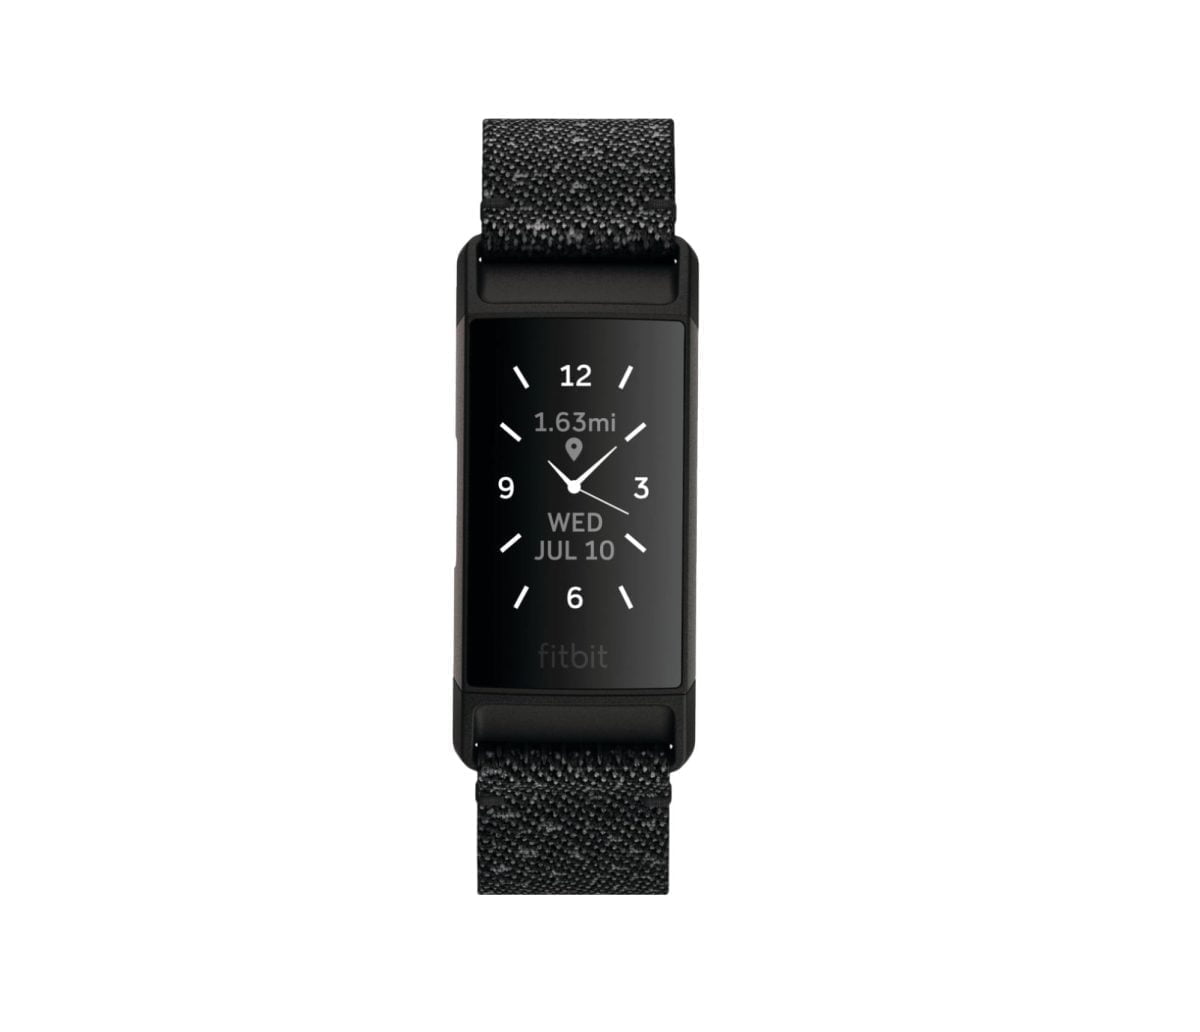 6405748 Sd Fitbit &Lt;H1&Gt;Fitbit Charge 4 Special Edition - Granite Reflective&Lt;/H1&Gt; Https://Www.youtube.com/Watch?V=De21Qkxar6W Keep Time And Log Workouts With This Fitbit Charge 4 Special Edition Activity Tracker. The Rechargeable Battery Delivers Up To 7 Days Of Use When Fully Charged, While The Intuitive Touchscreen Displays Notifications Clearly. This Fitbit Charge 4 Special Edition Activity Tracker Has A Swimproof Design For Safe Use In The Pool, And The Included Granite Reflective Band And Classic Black Polyester Band Offer Nighttime Visibility And Create A Secure Fit. Fitbit Charge 4 Fitbit Charge 4 Special Edition - Granite Reflective